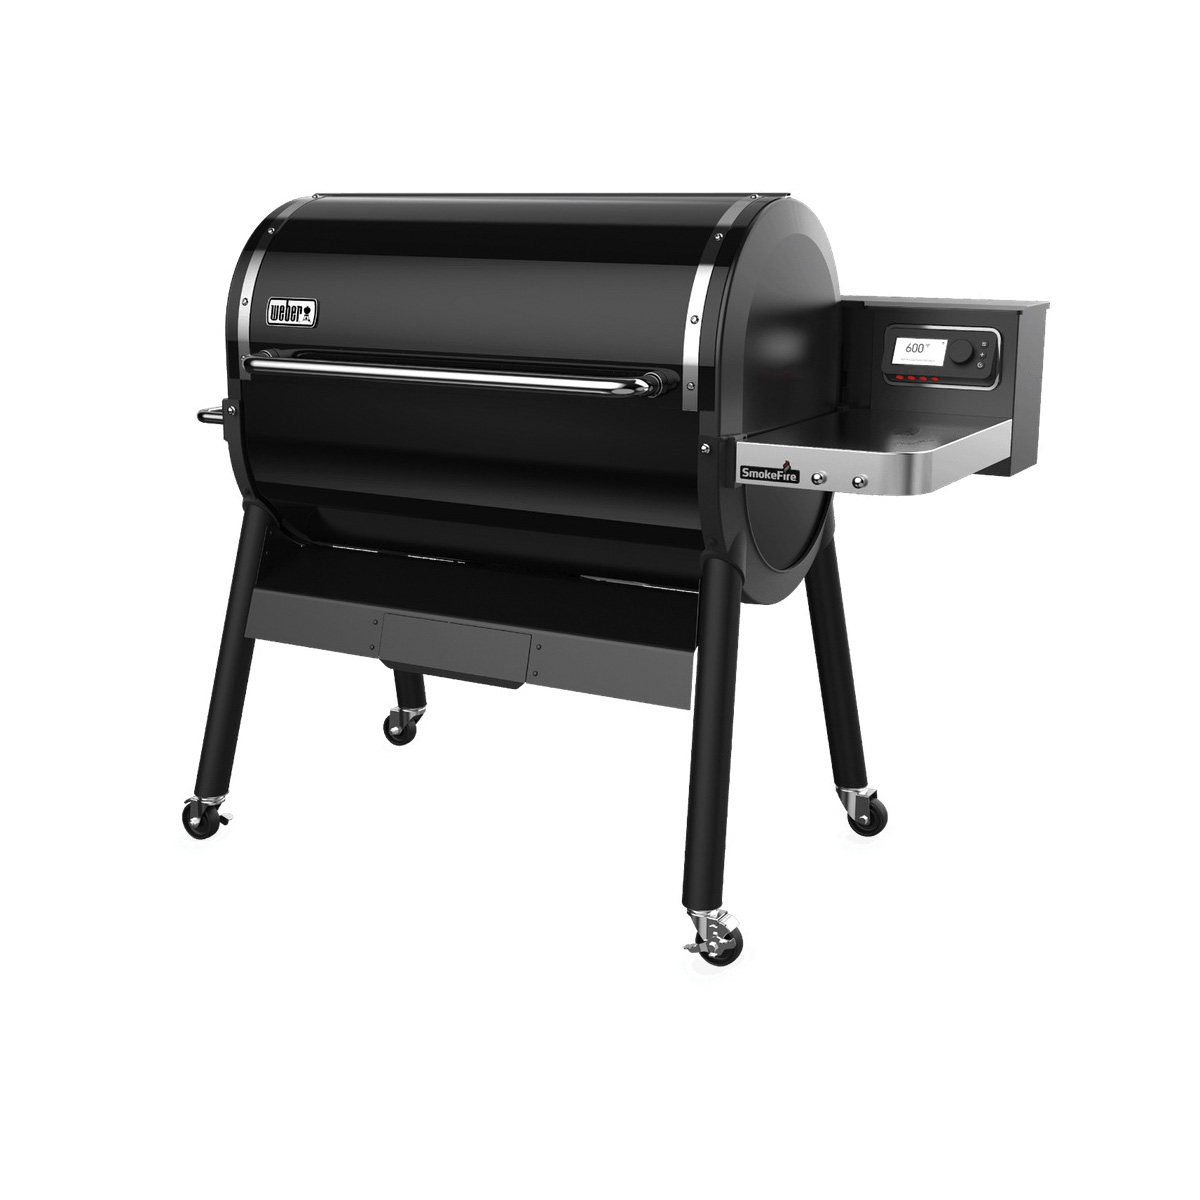 Weber SmokeFire 23510001 Pellet Grill, 1008 sq-in Primary Cooking Surface, Side Shelf Included: Yes, Steel Body, Black - 2